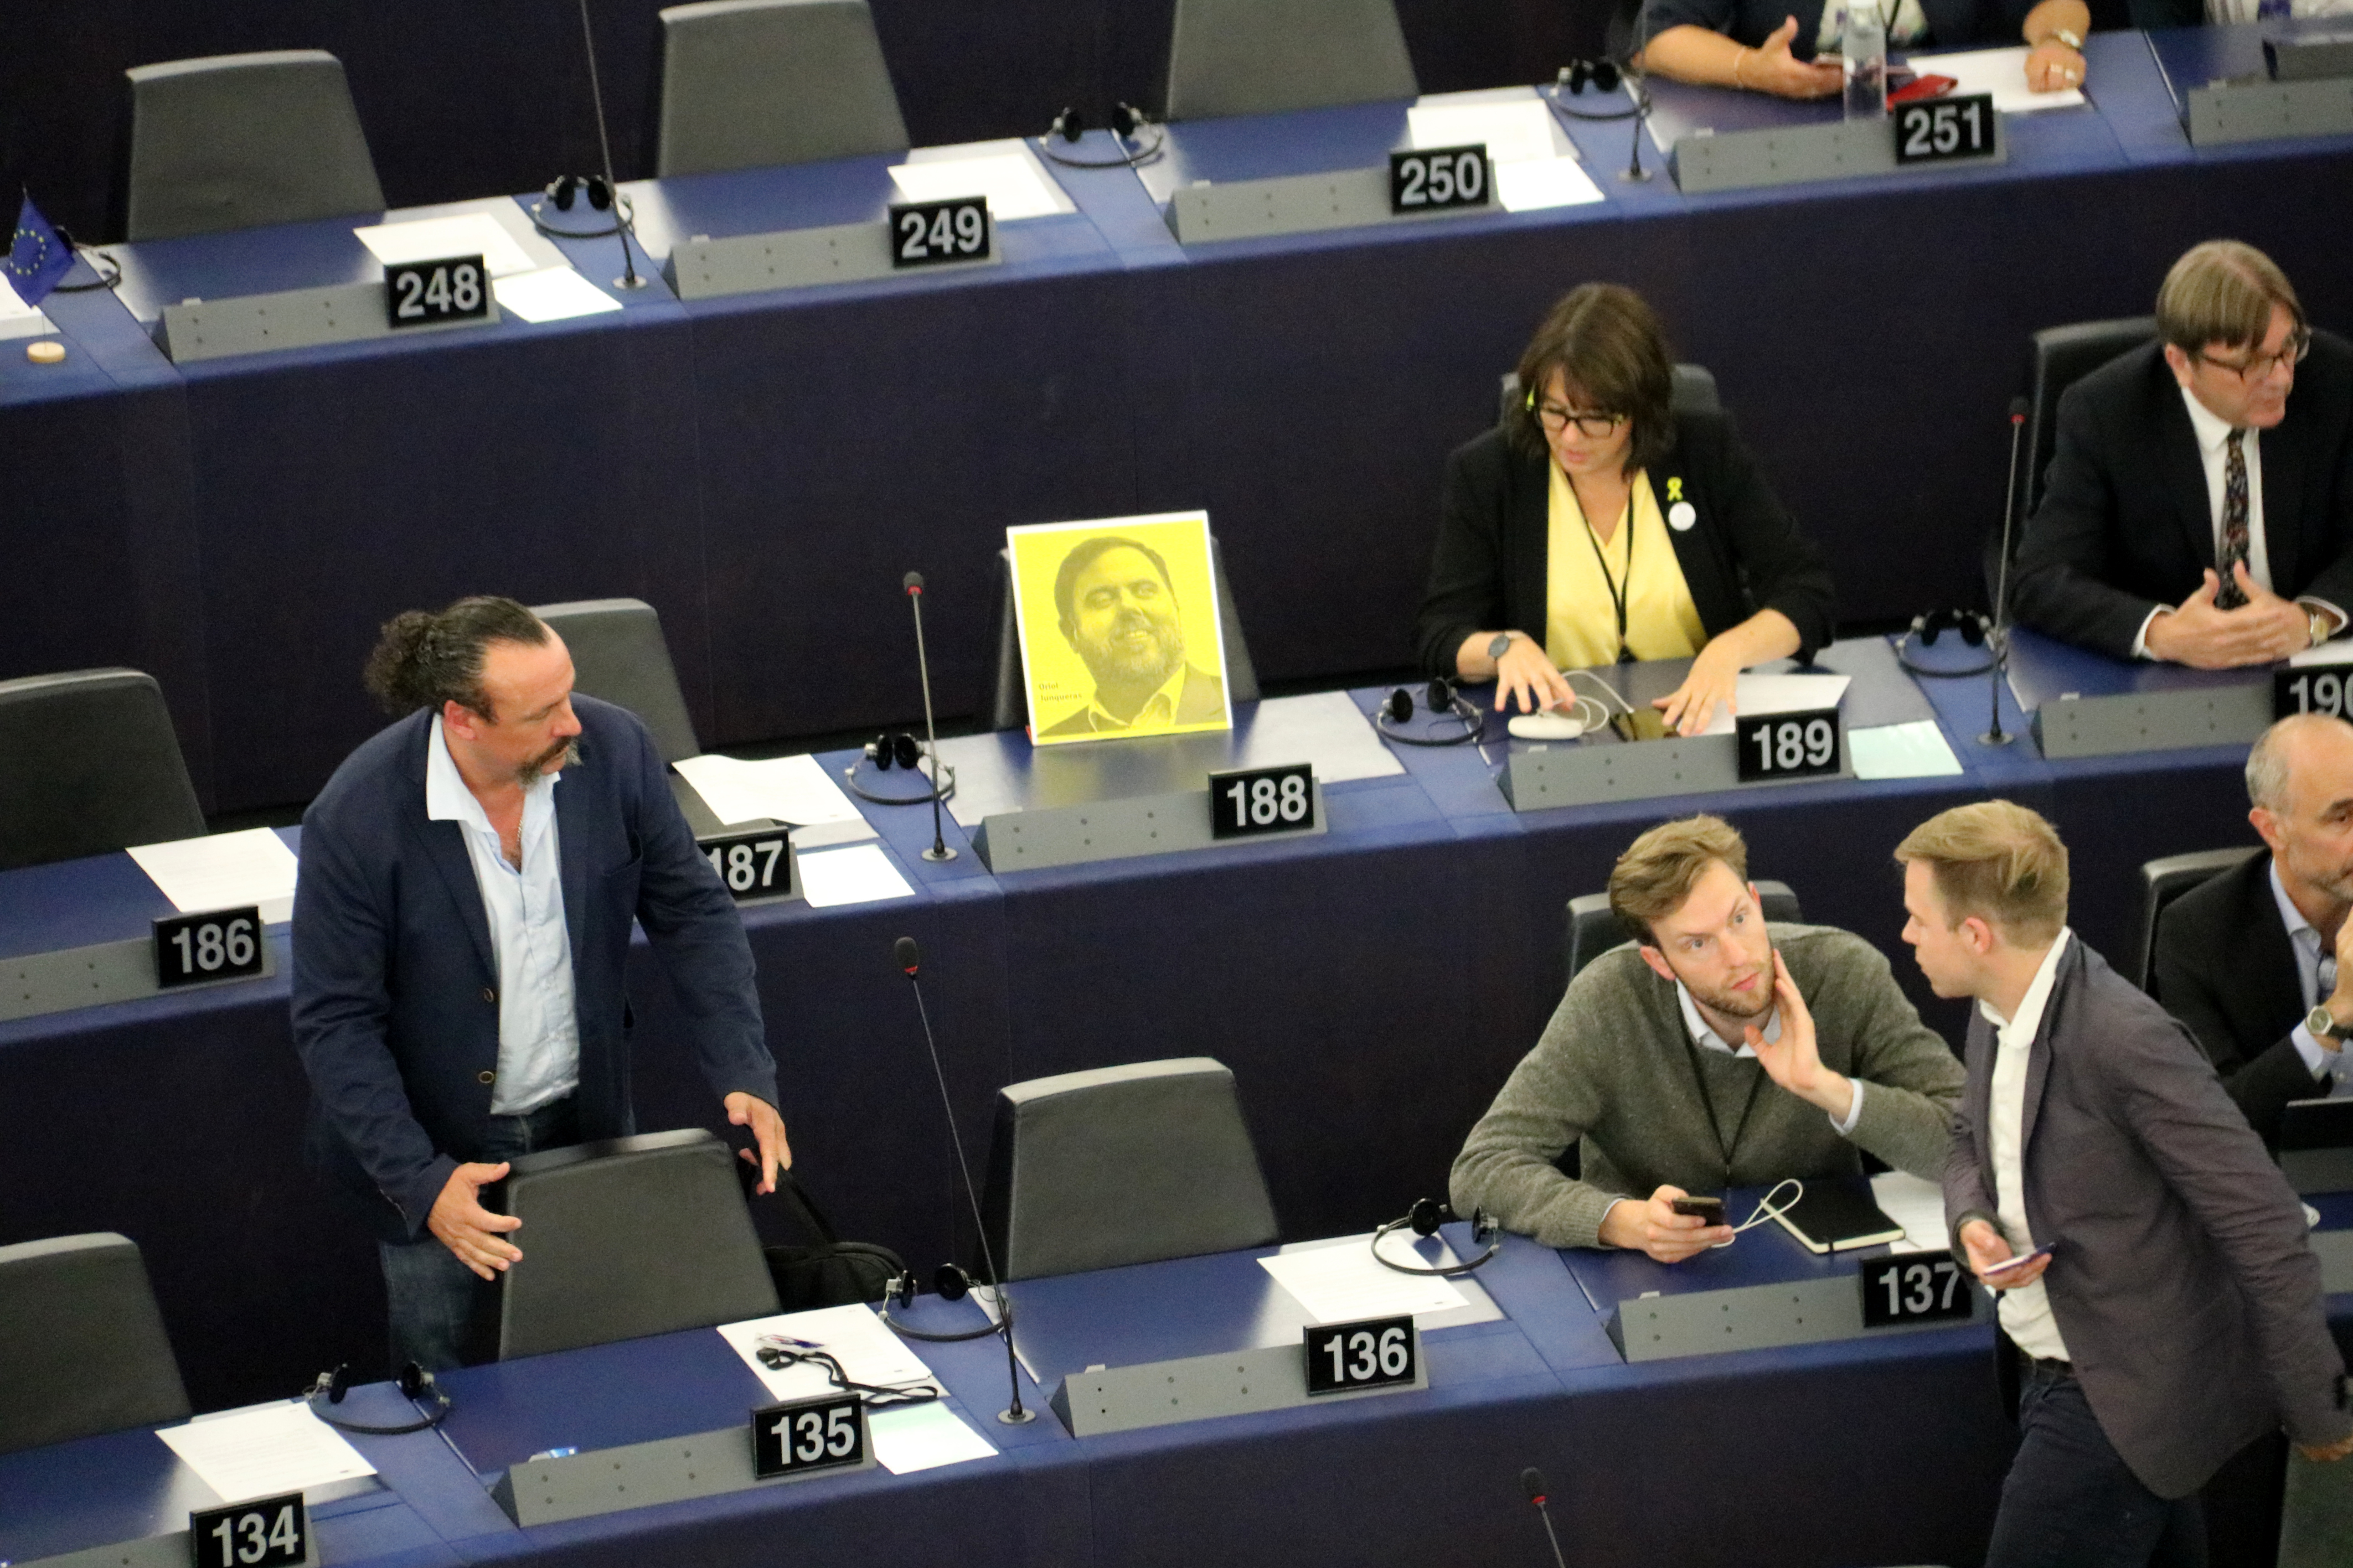 Oriol Junqueras' vacant seat in the European Parliament, with a portrait of the jailed Catalan leader (by Blanca Blay)